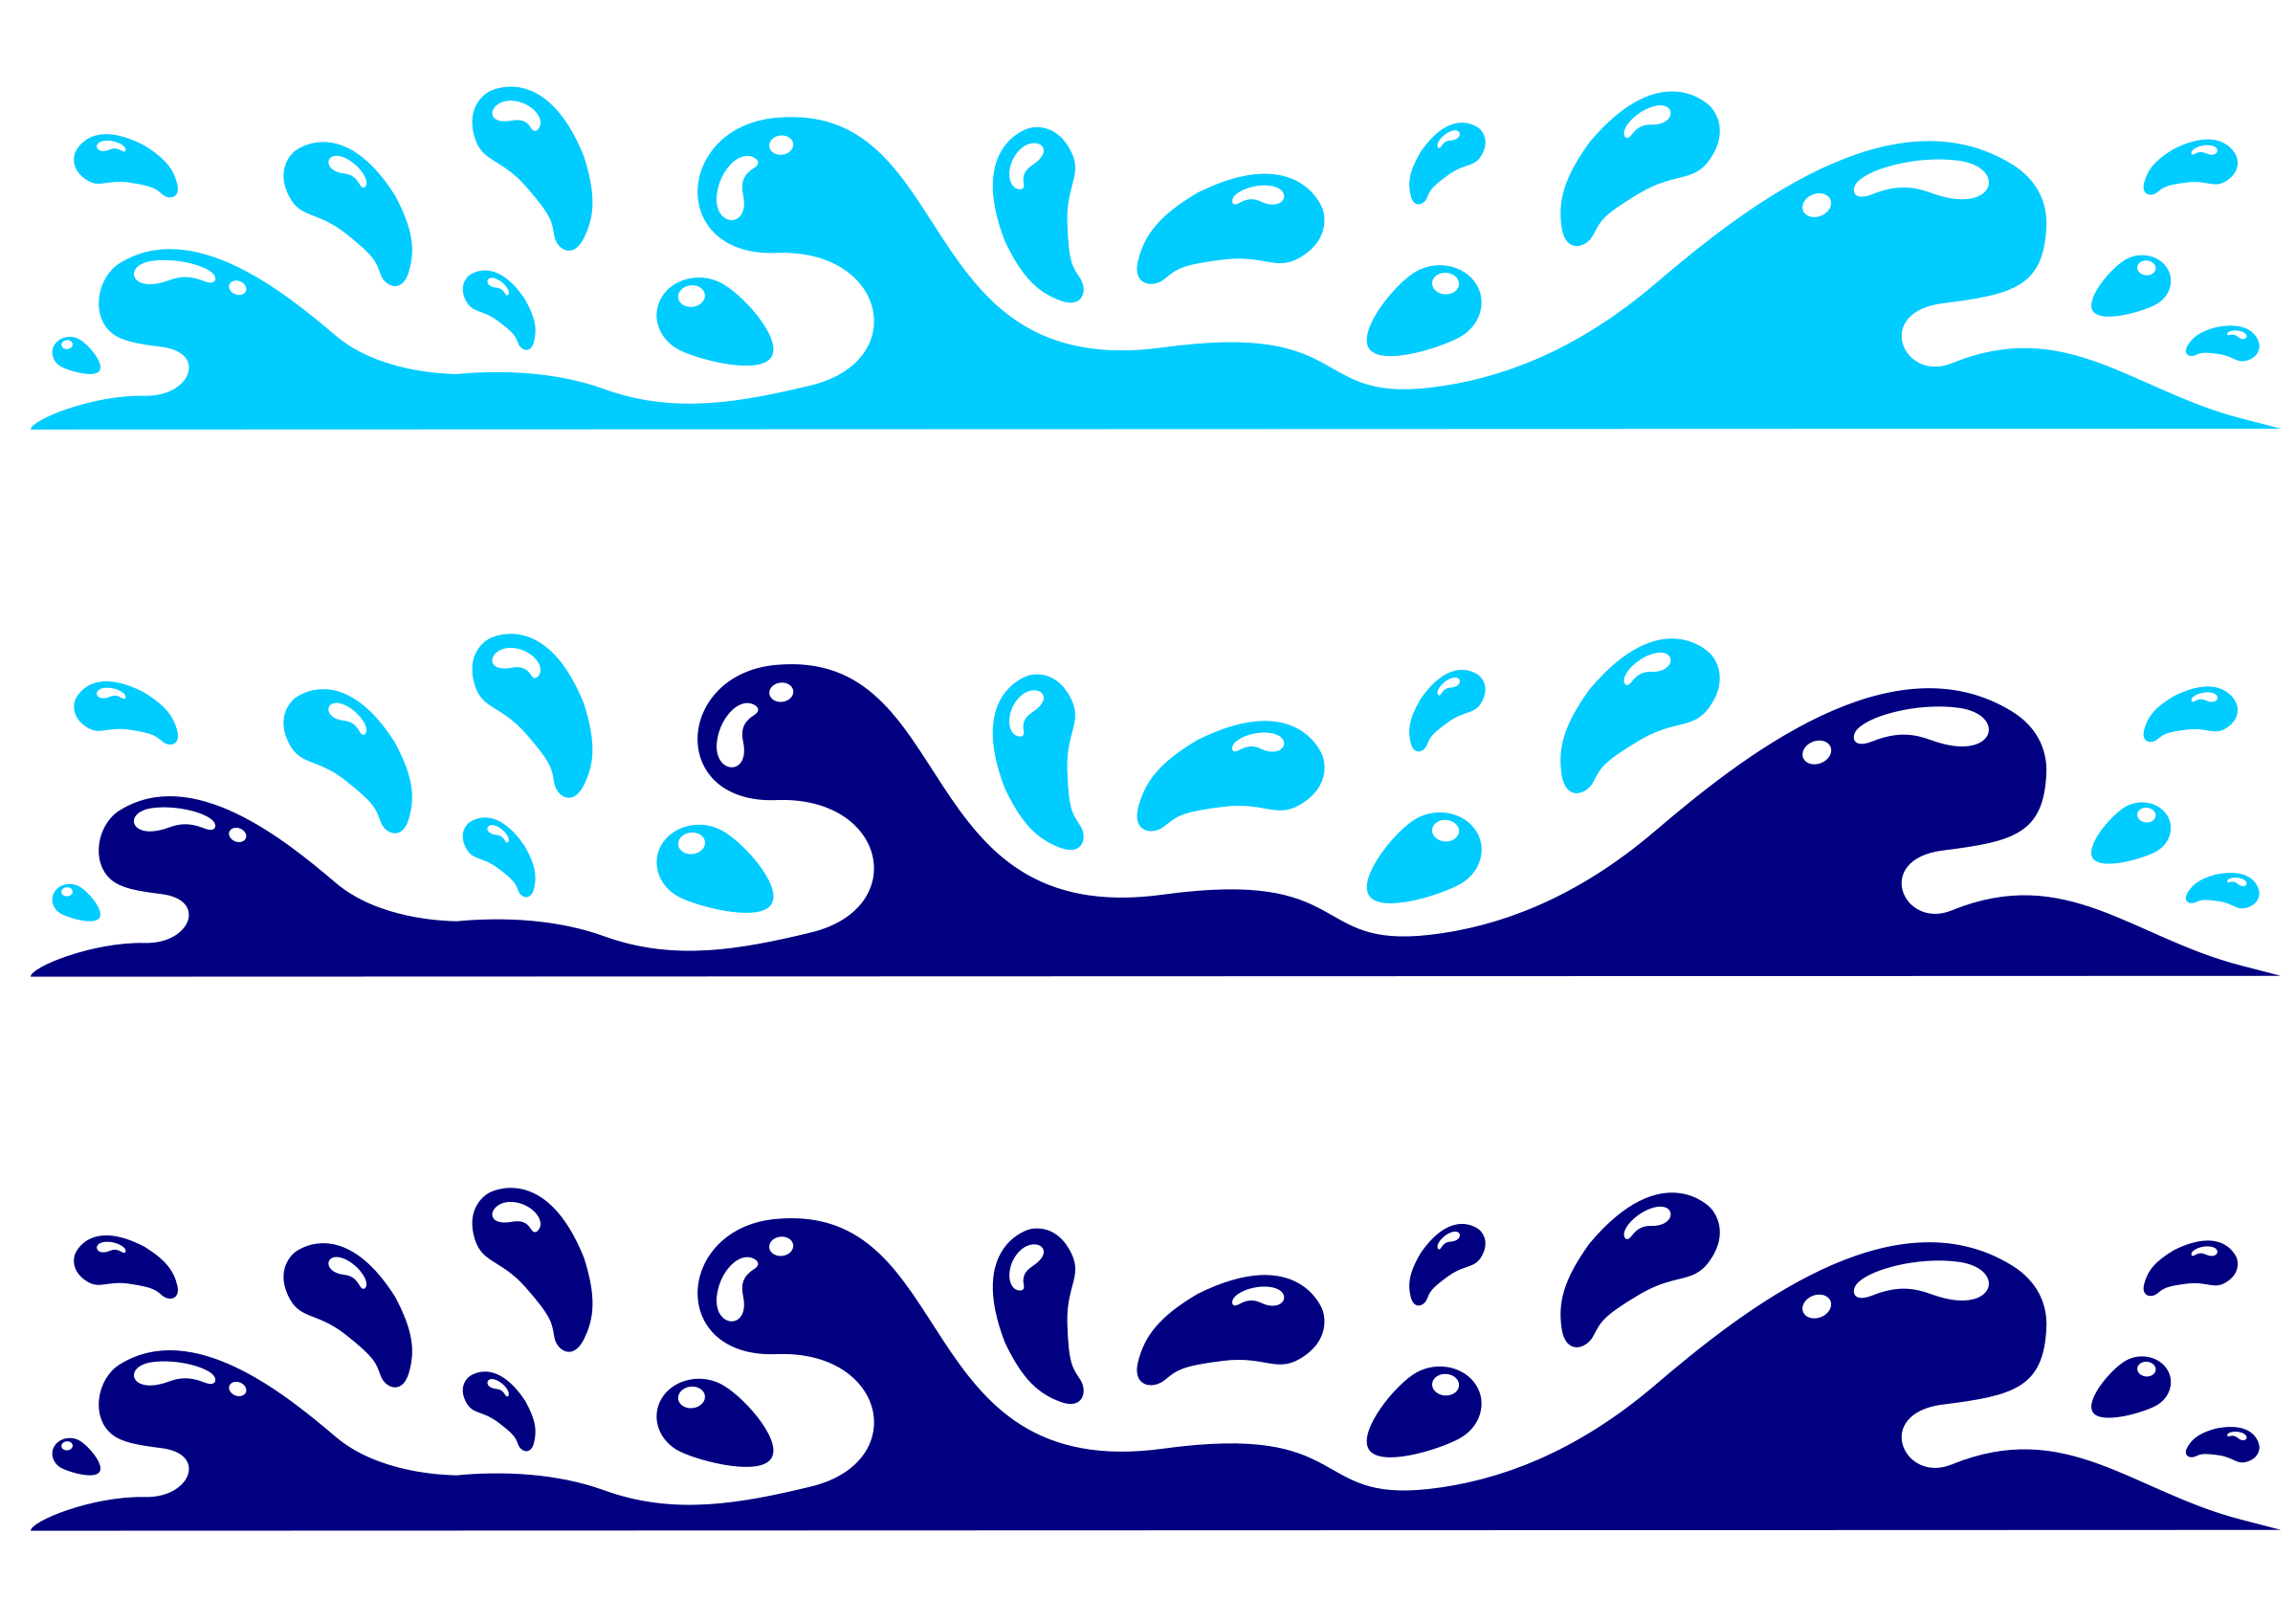 In water clipground spray. Waves clipart ocean current